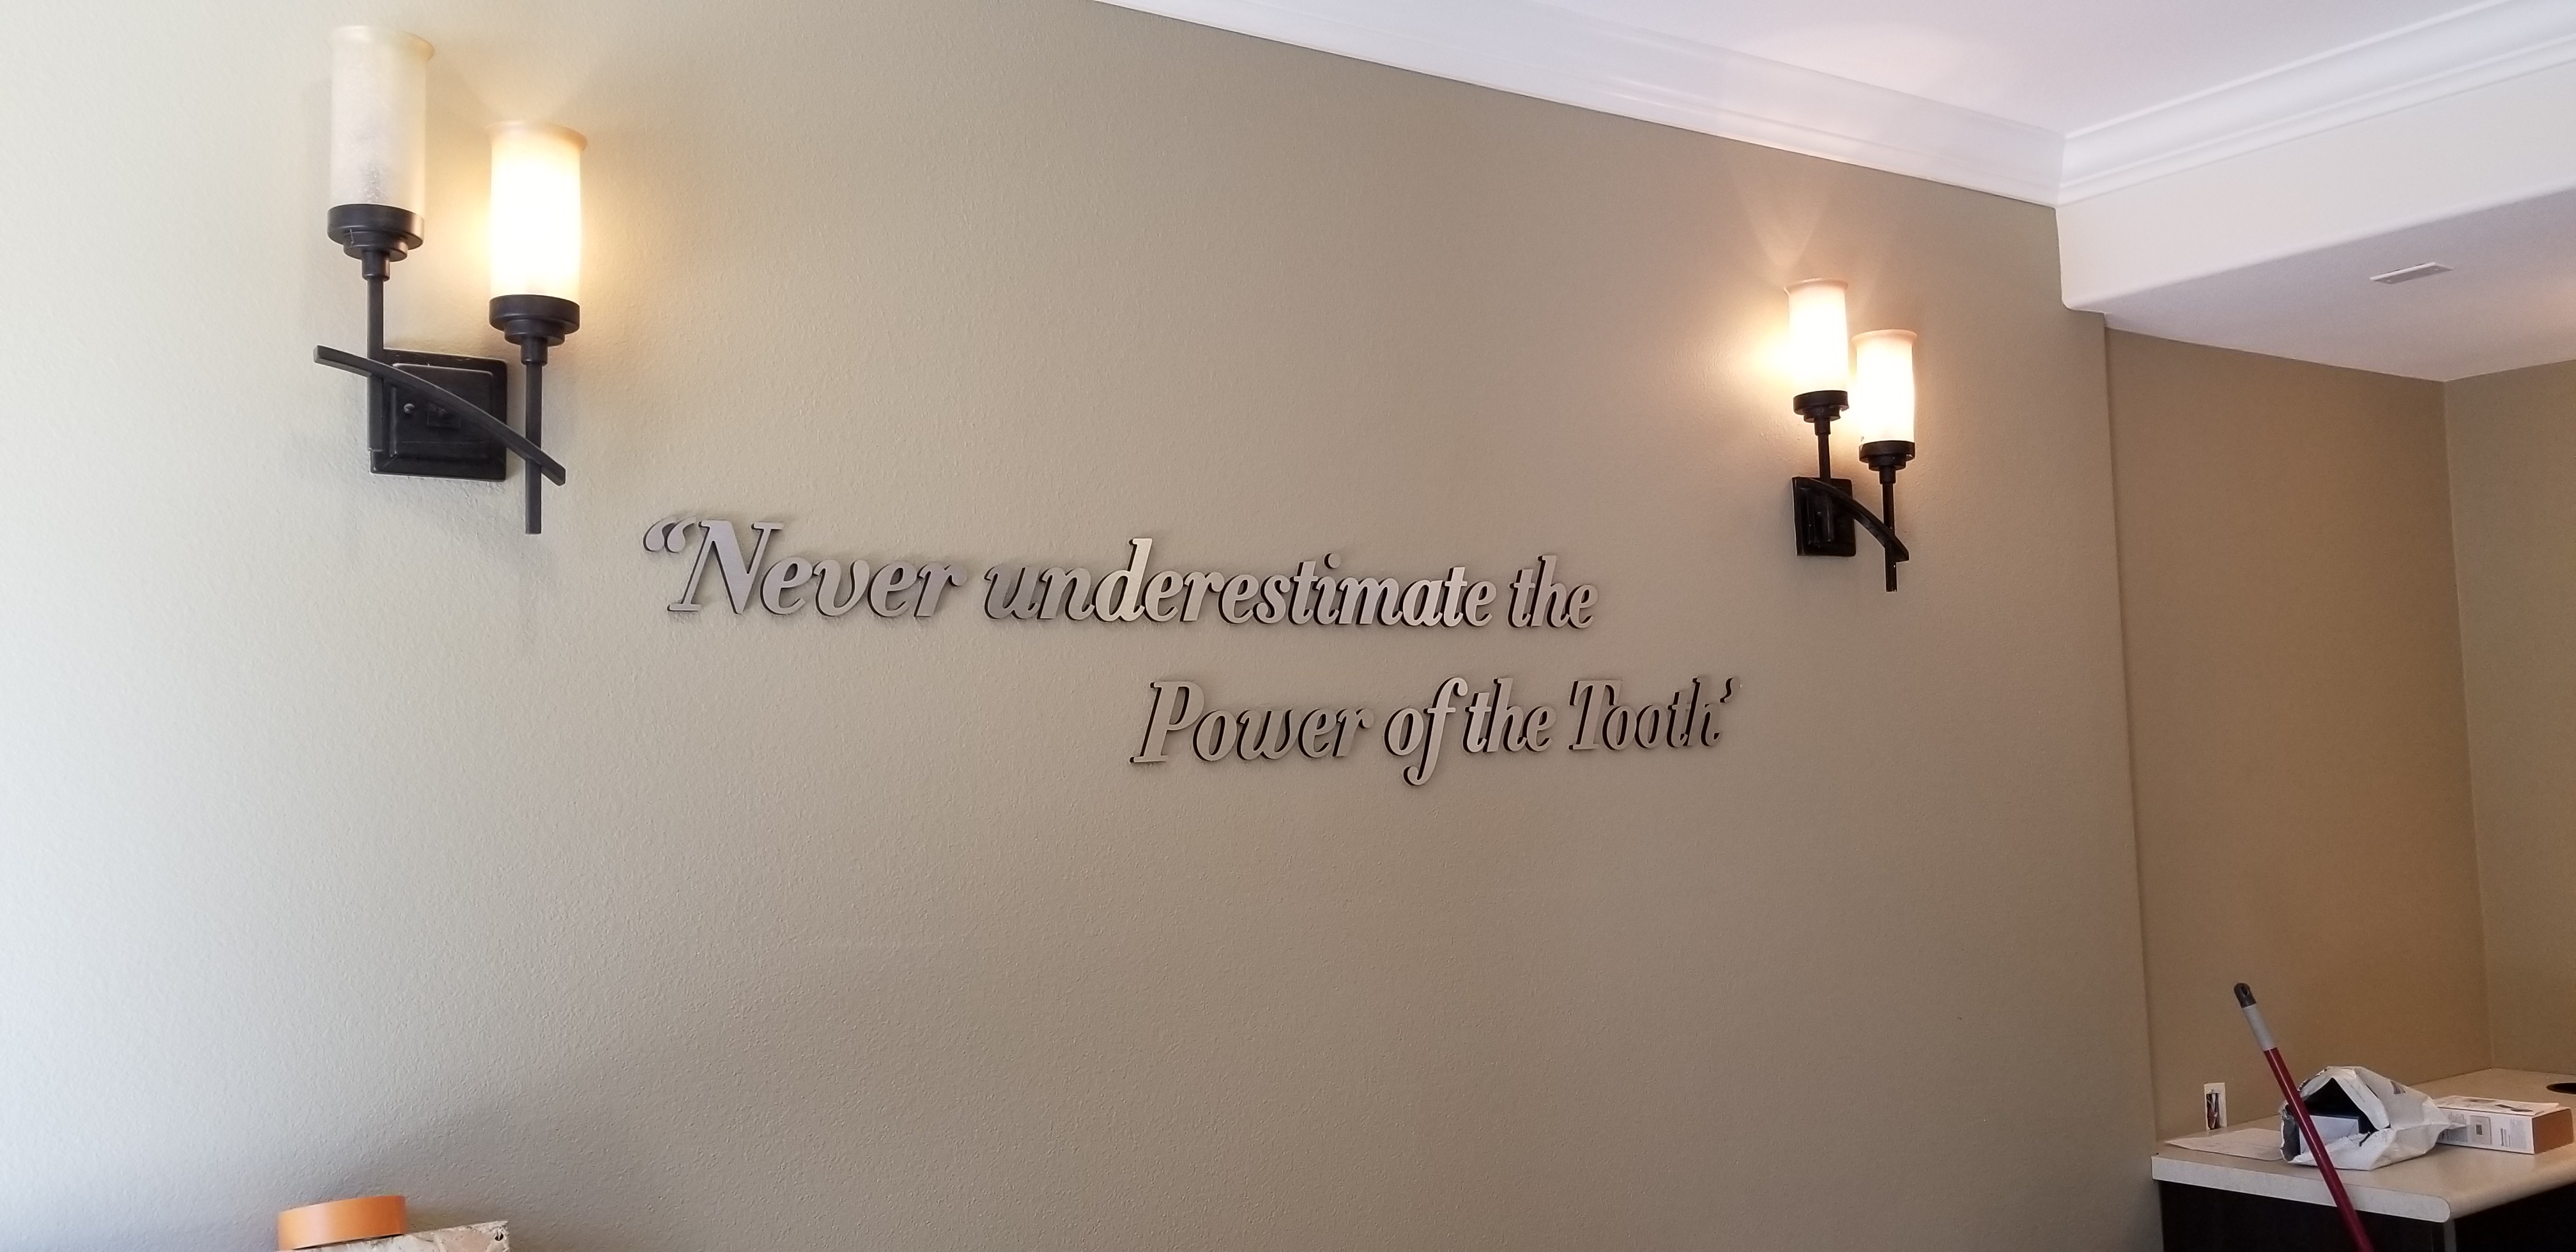 Inspiring words can decorate a lobby, brighten days and also complimenting the centerpiece. Like this dentist clinic lobby sign for Glendora Oral Surgery.